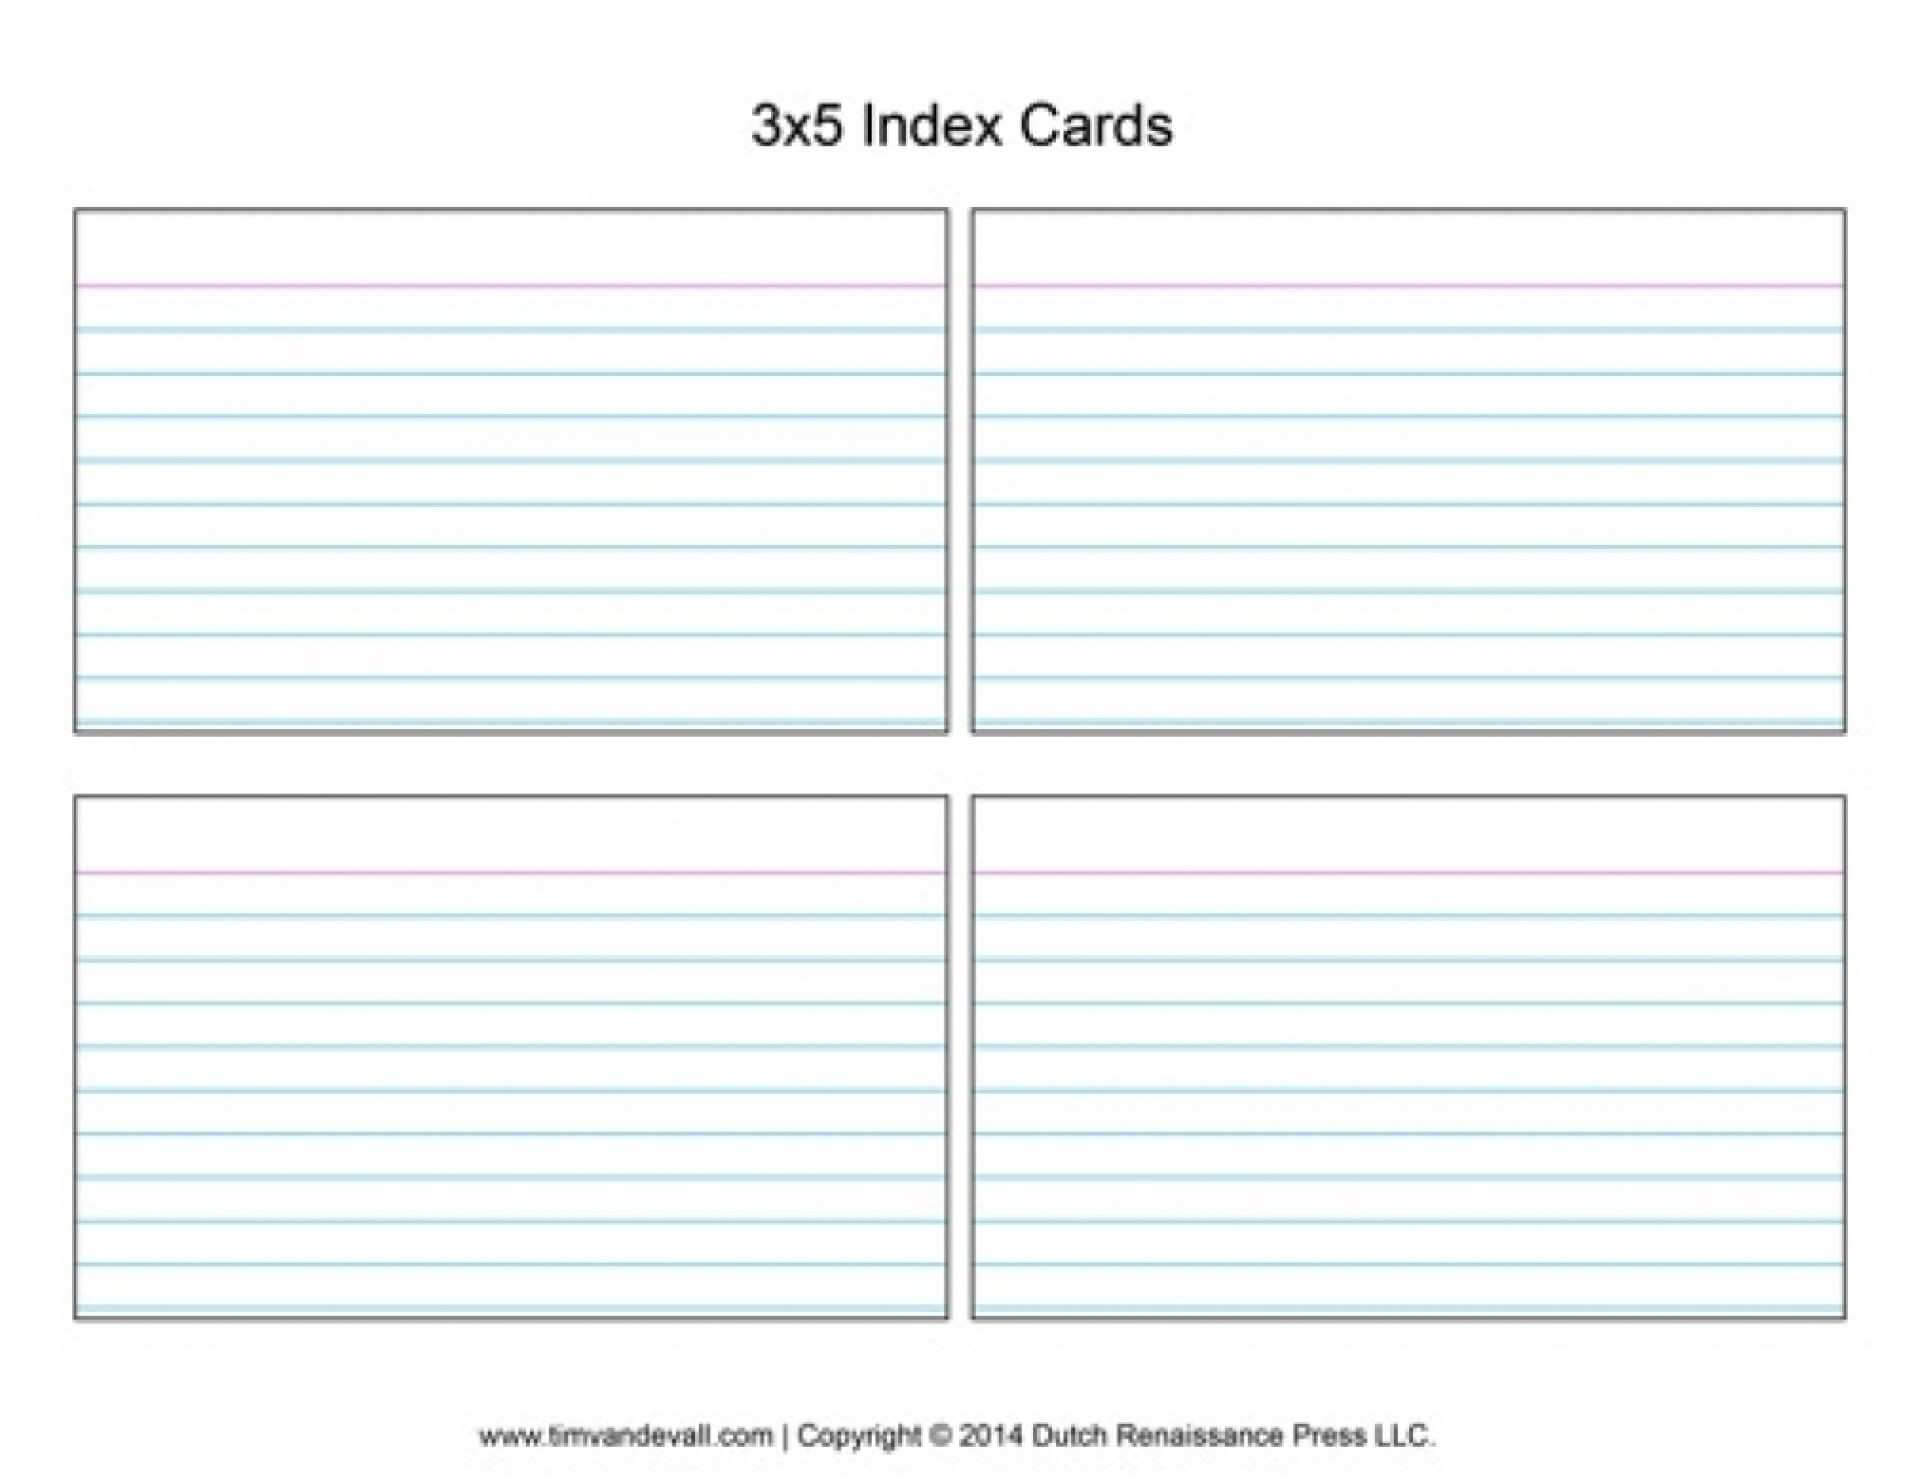 004 Best 5X8 Index Card Template Free In Word For Surprising In 3X5 Blank Index Card Template